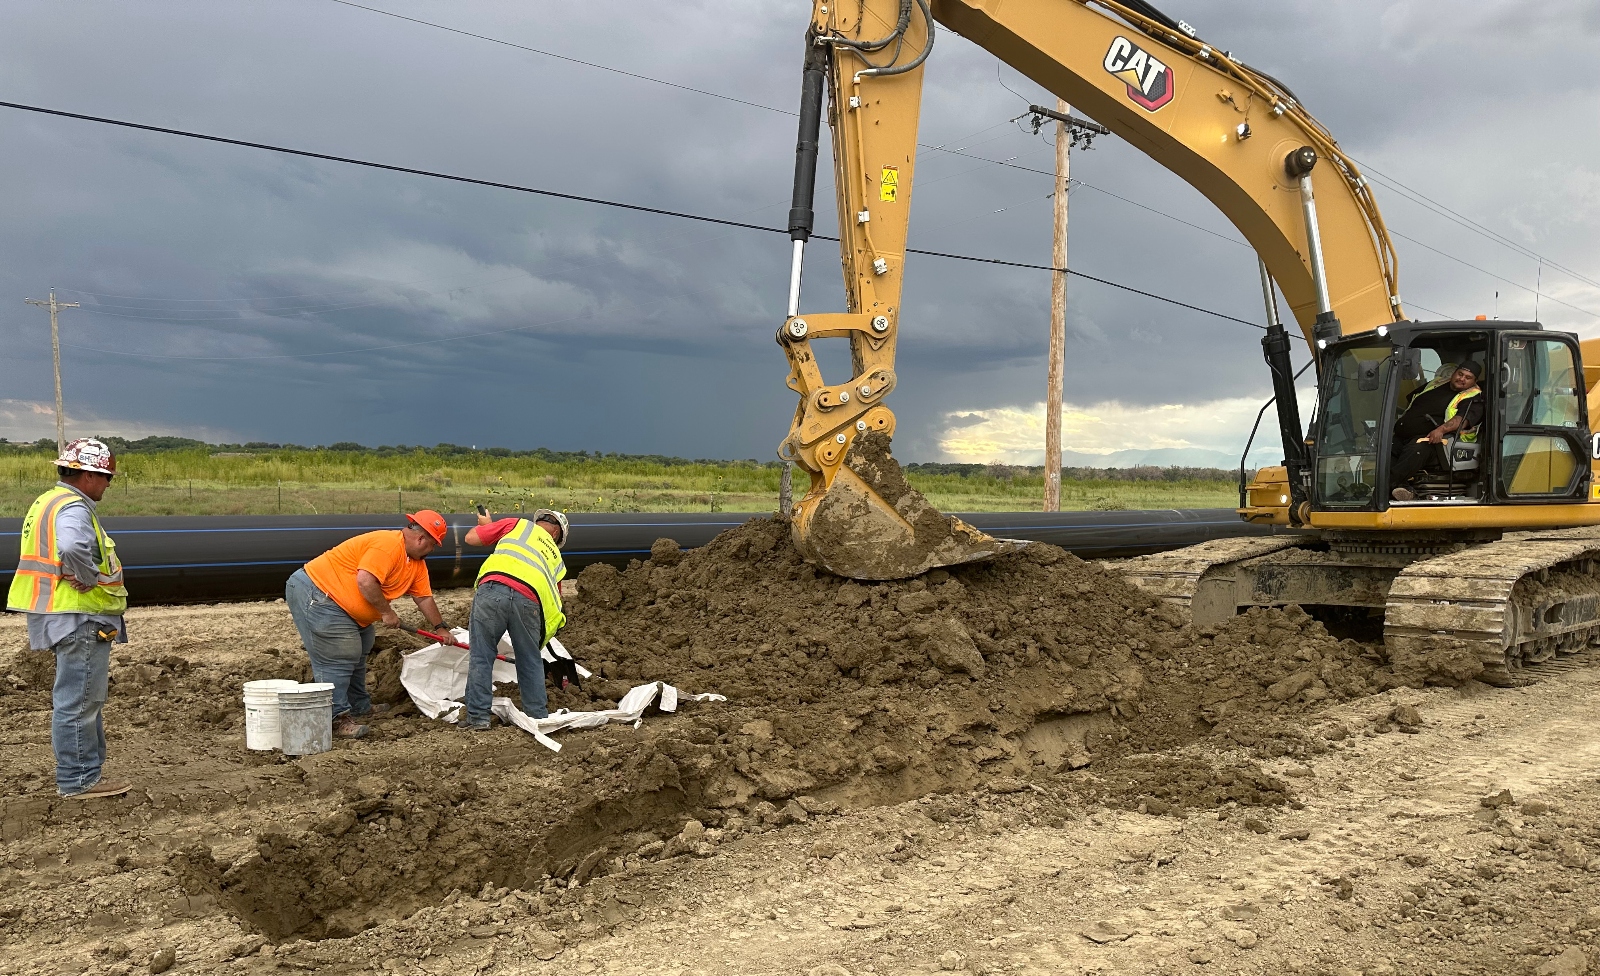 Workers install a segment of pipeline near Pueblo, Colorado, as part of the Arkansas Valley Conduit project. The project is being funded by the bipartisan infrastructure bill Congress passed in 2021.